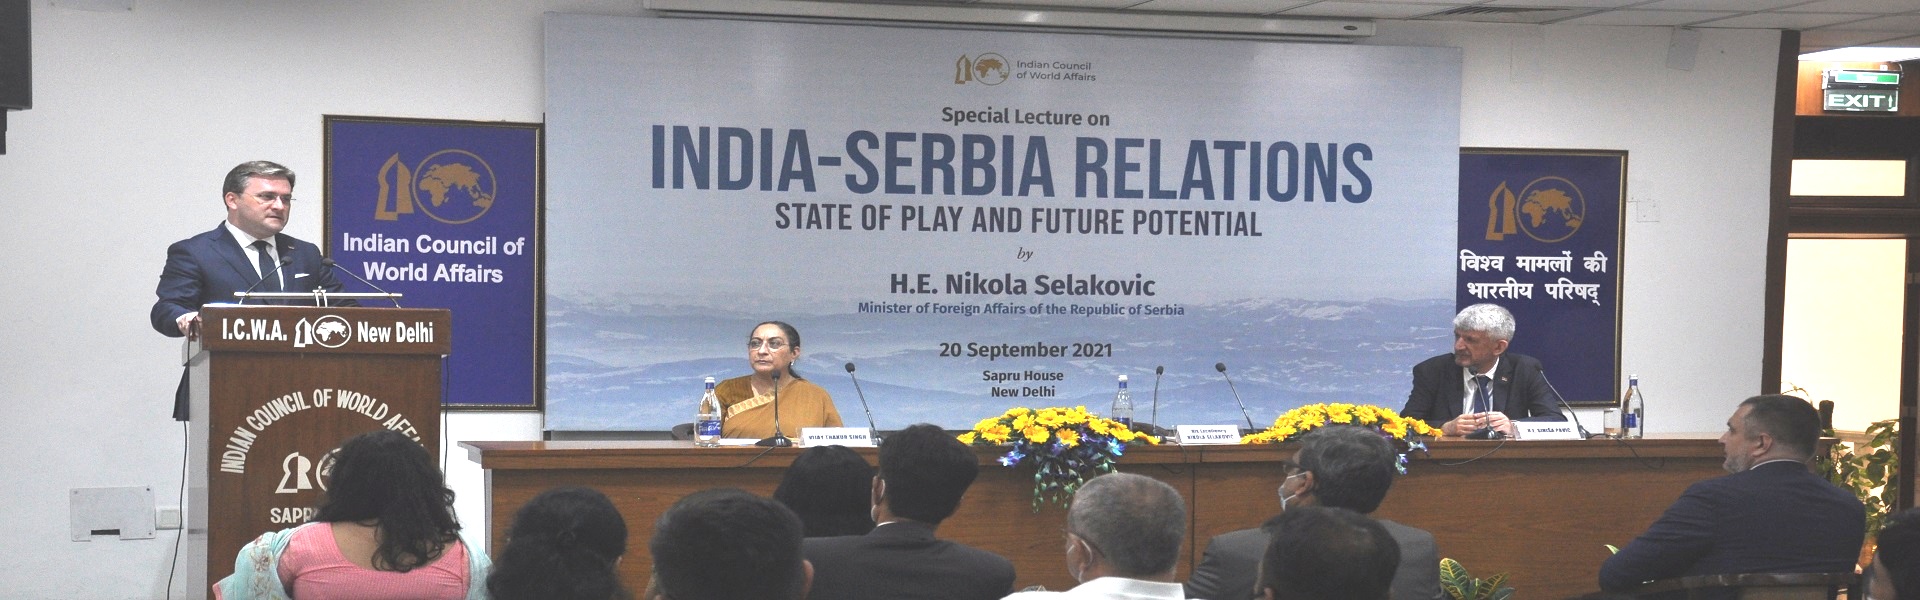 Special Lecture by H.E. Mr. Nikola Selaković, Minister of Foreign Affairs of the Republic of Serbia on India-Serbia Relations: State of Play and Future Potential, 20 September 2021